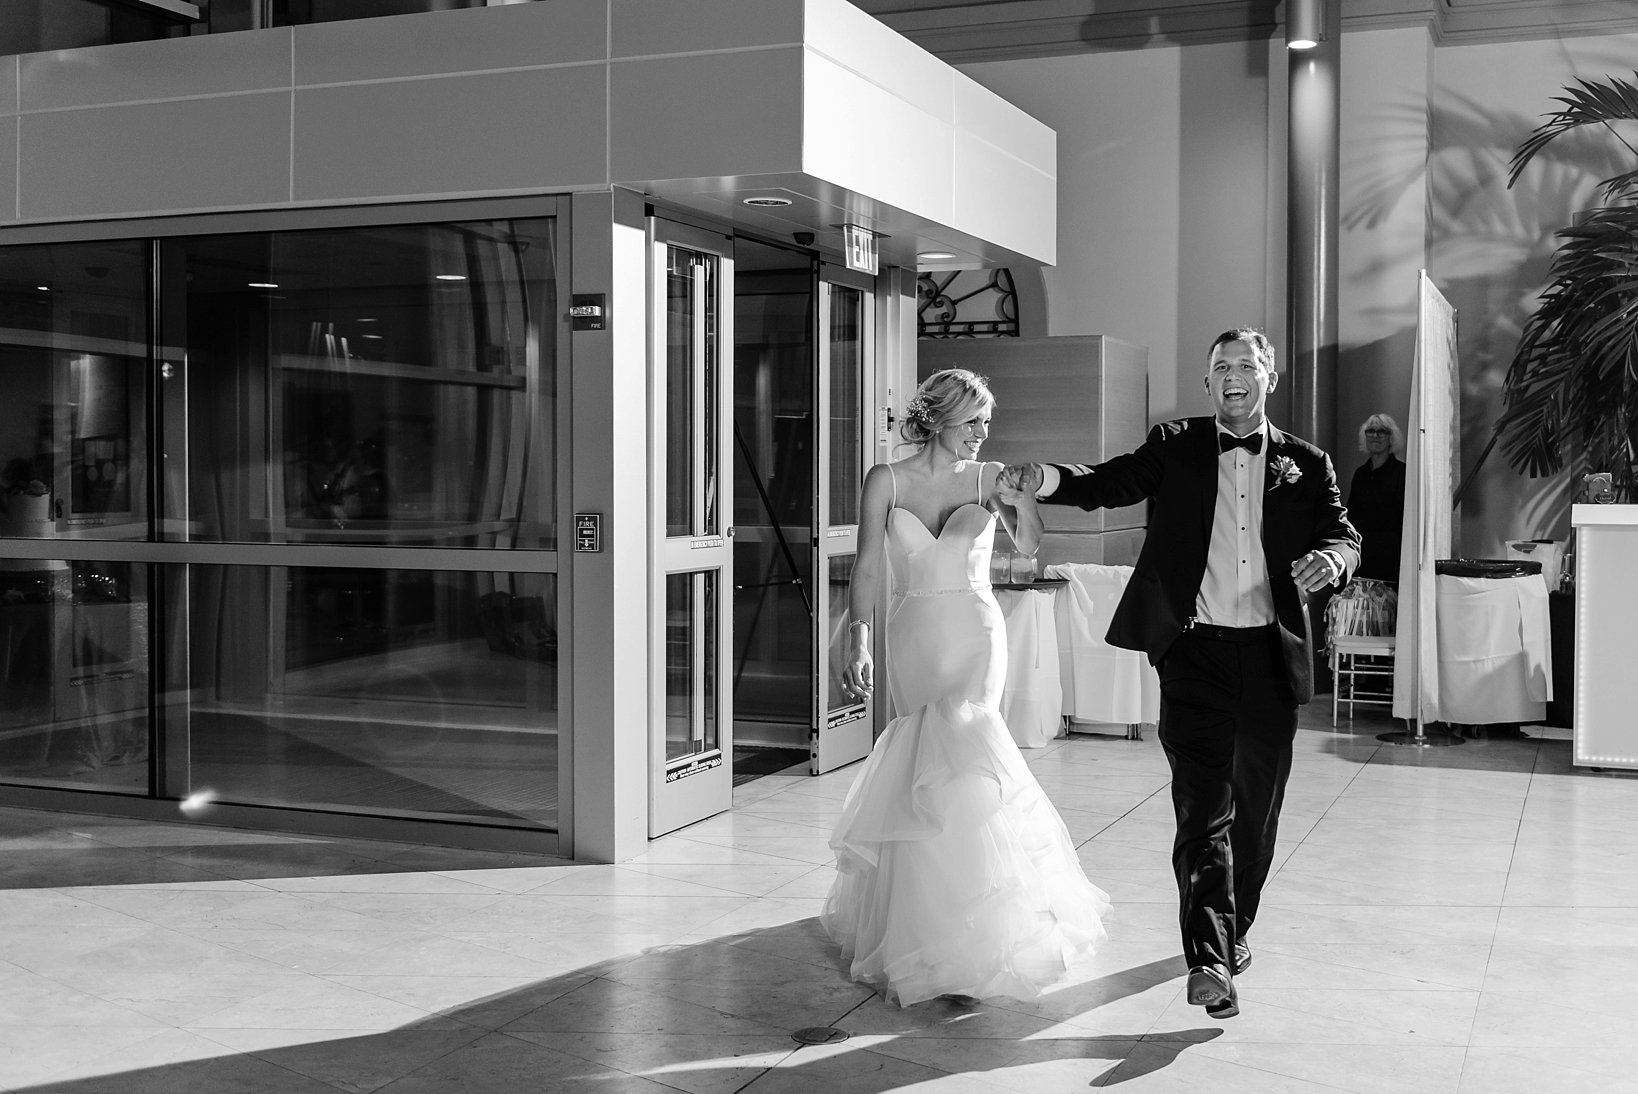 The Bride and Groom enter their reception dancing and laughing